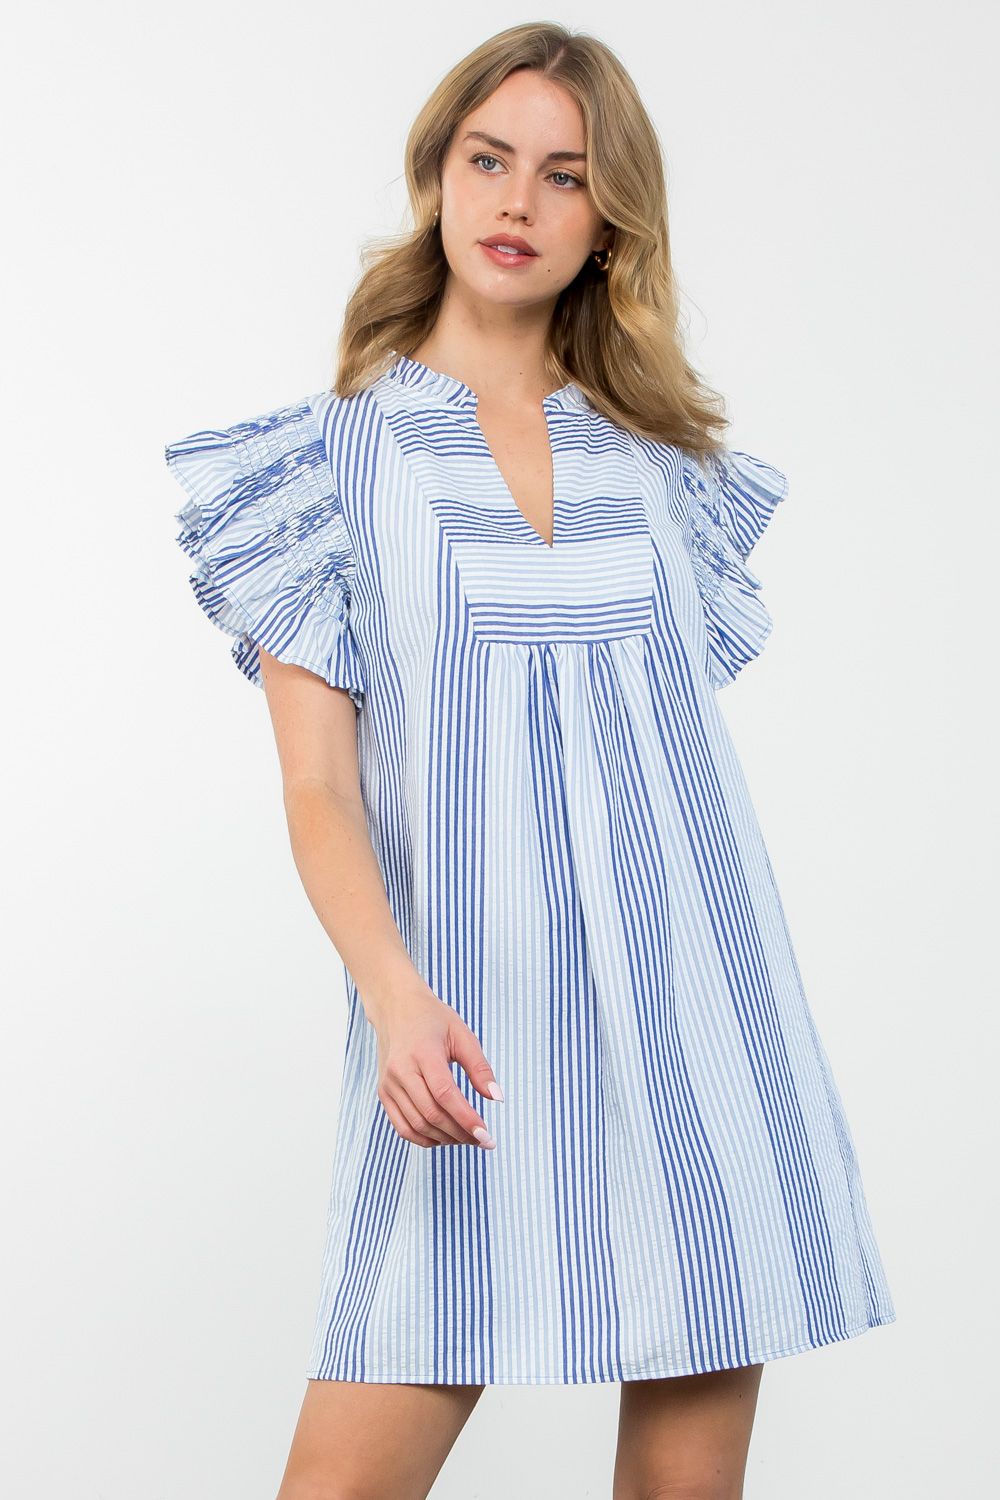 All Day Italy Striped Dress